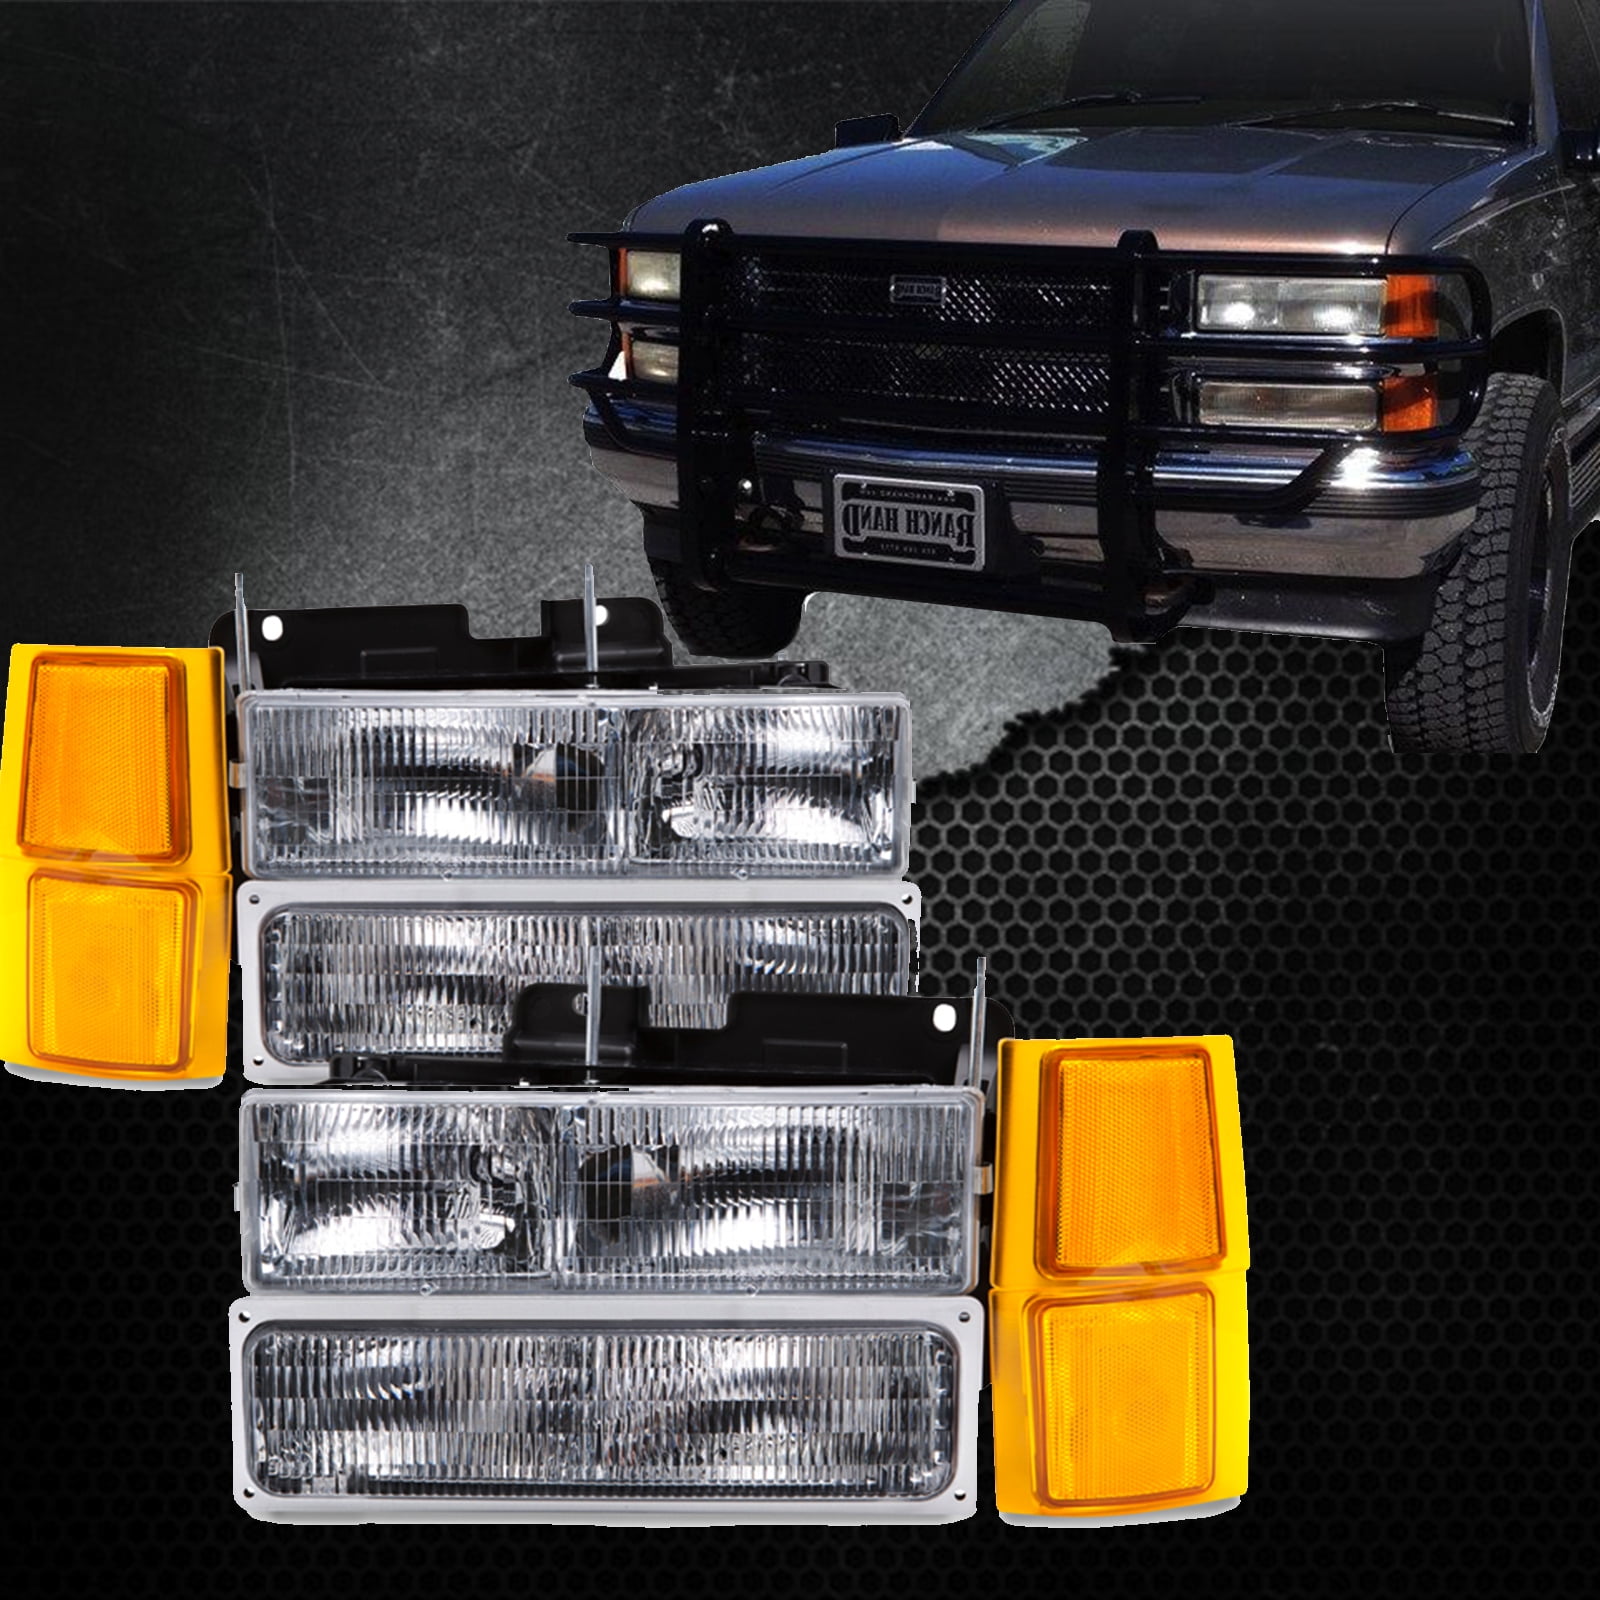 HEADLIGHTSDEPOT Black Housing with Halo with Xenons 8 Piece Set Halogen Headlights Compatible with Chevrolet GMC Blazer C1500 Suburban Tahoe Yukon 1990-2000 Includes Left and Right Side Headlamps 